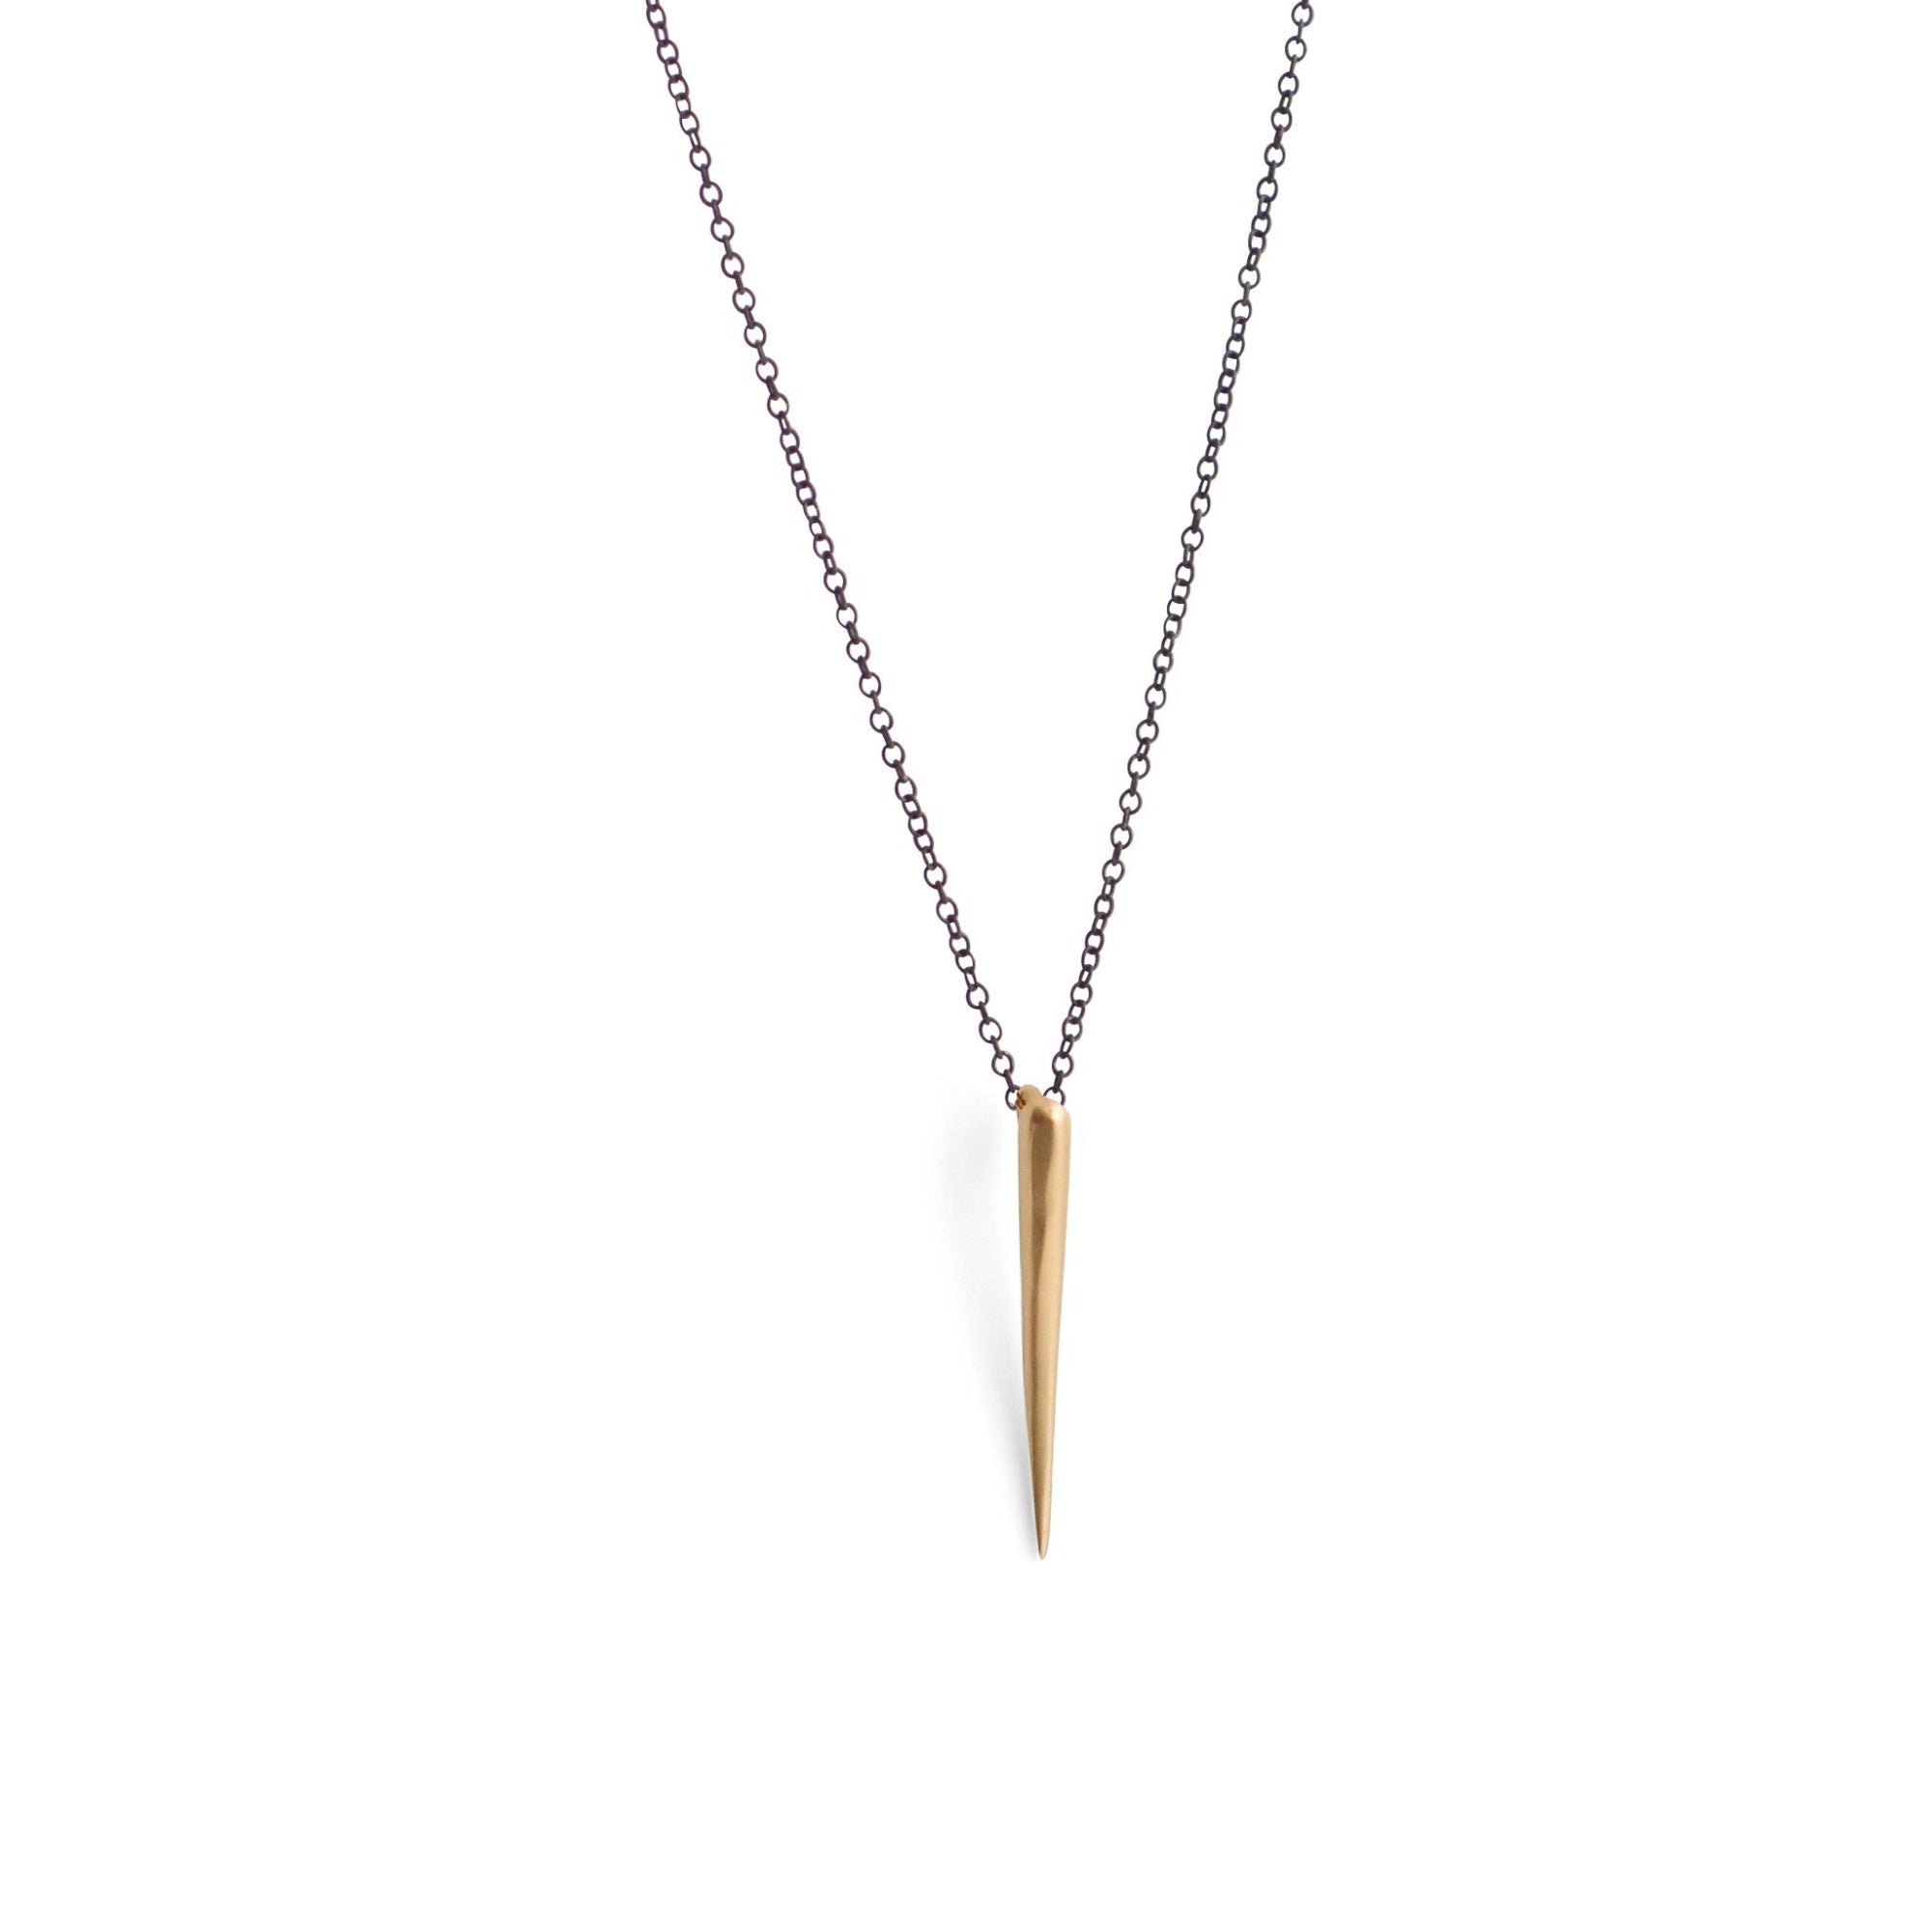 14k yellow gold on an oxidized chain tapered swell necklace